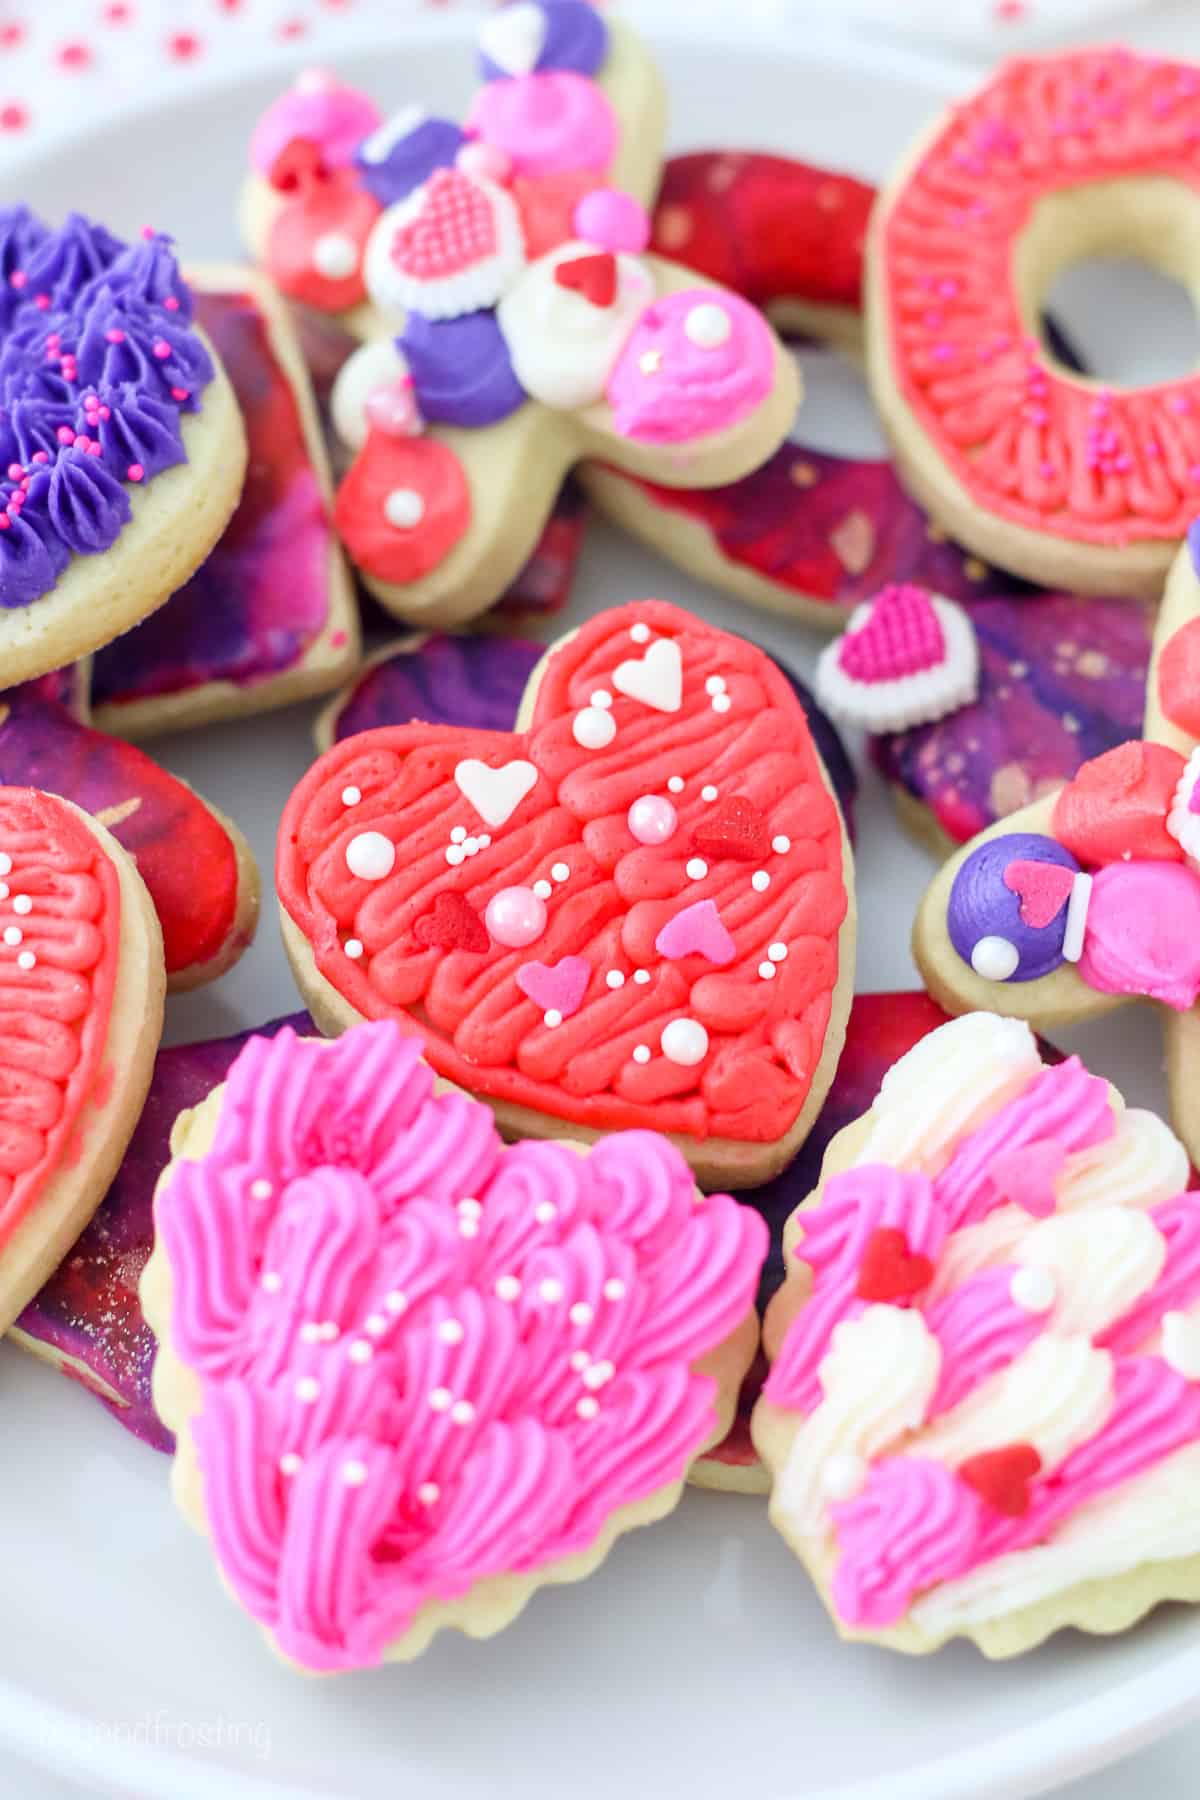 Close up of assorted cut-out Valentine's Day sugar cookies decorated with icing and frosting on a white plate.